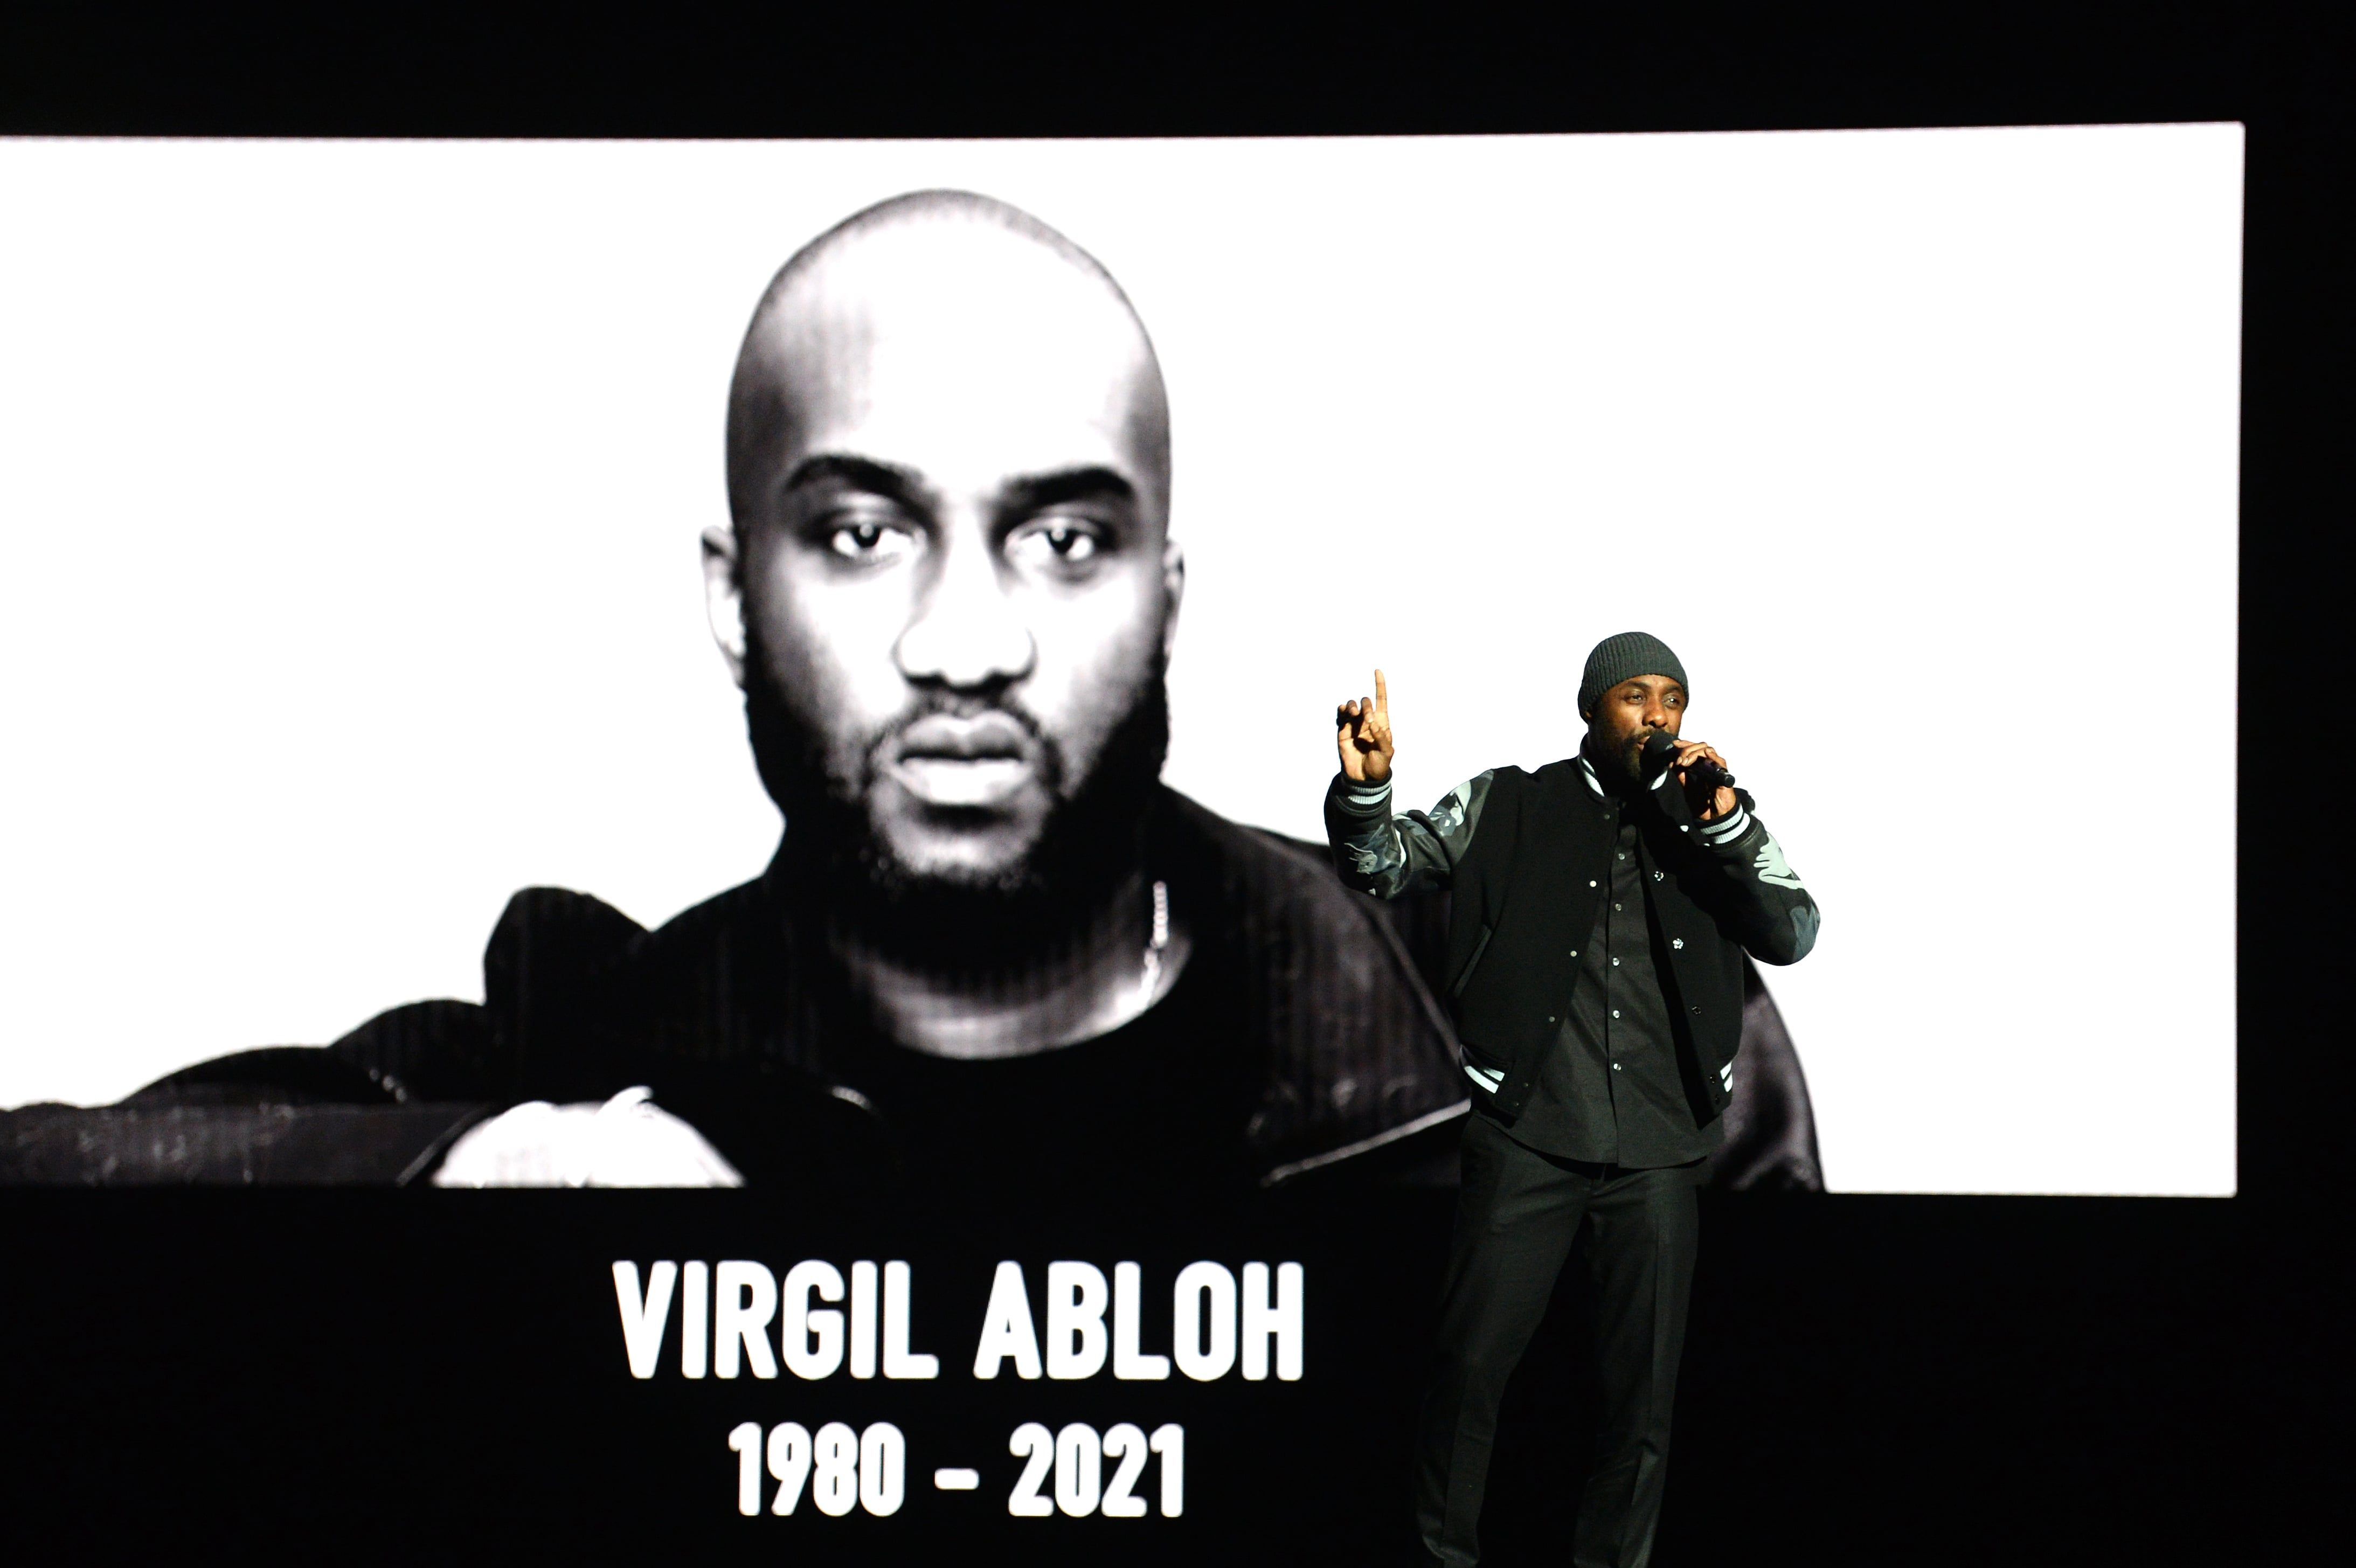 Louis Vuitton pays tribute to Virgil Abloh in Miami